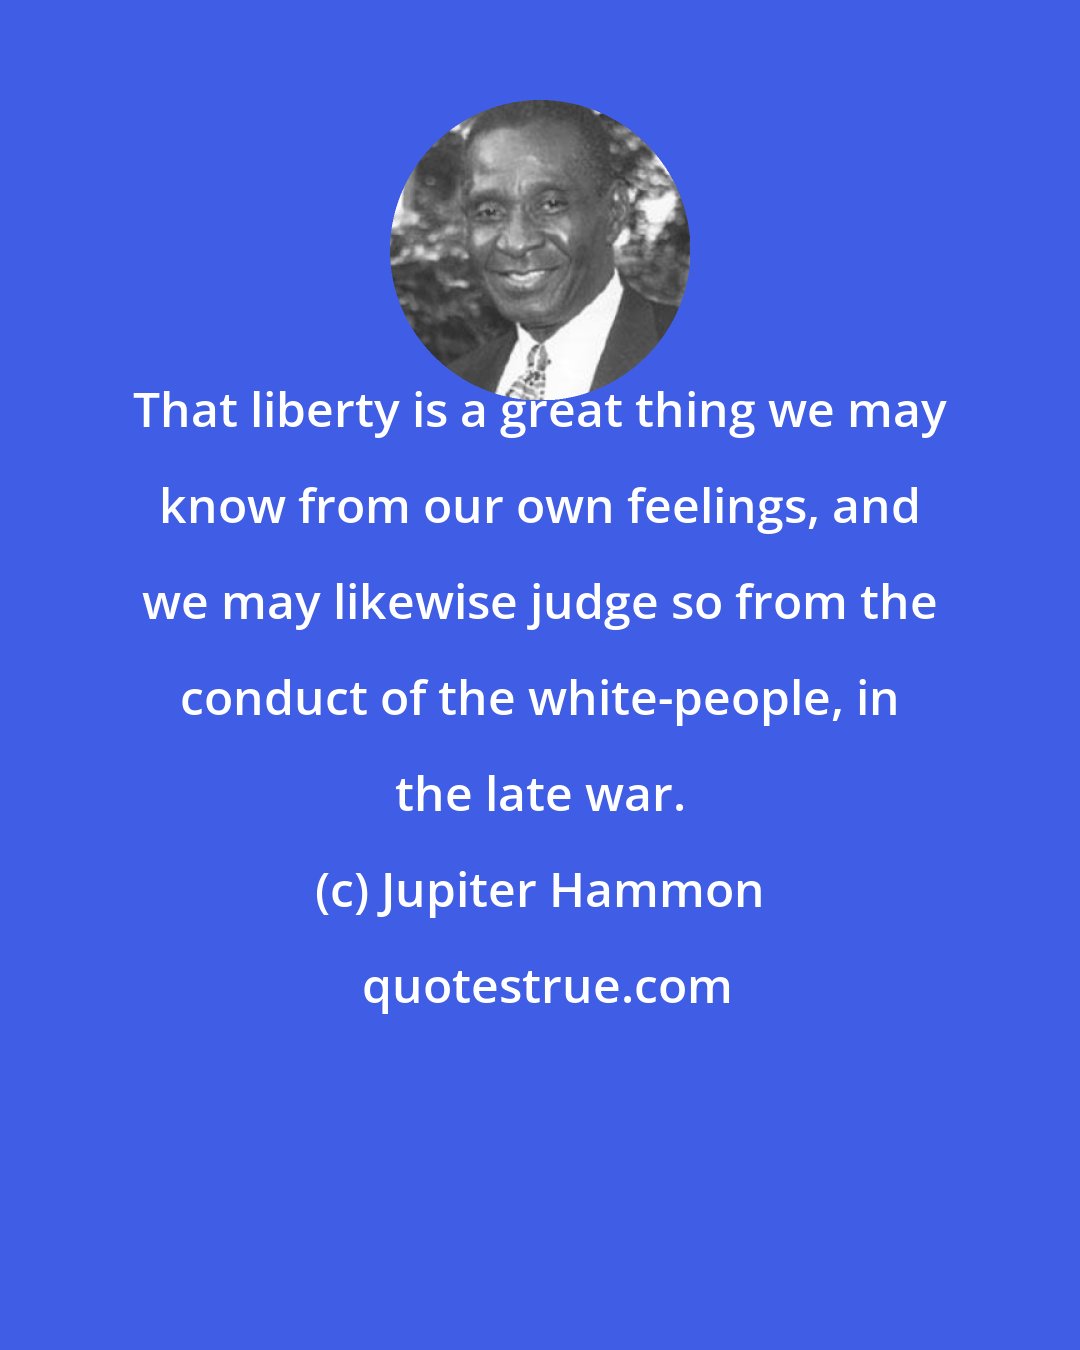 Jupiter Hammon: That liberty is a great thing we may know from our own feelings, and we may likewise judge so from the conduct of the white-people, in the late war.